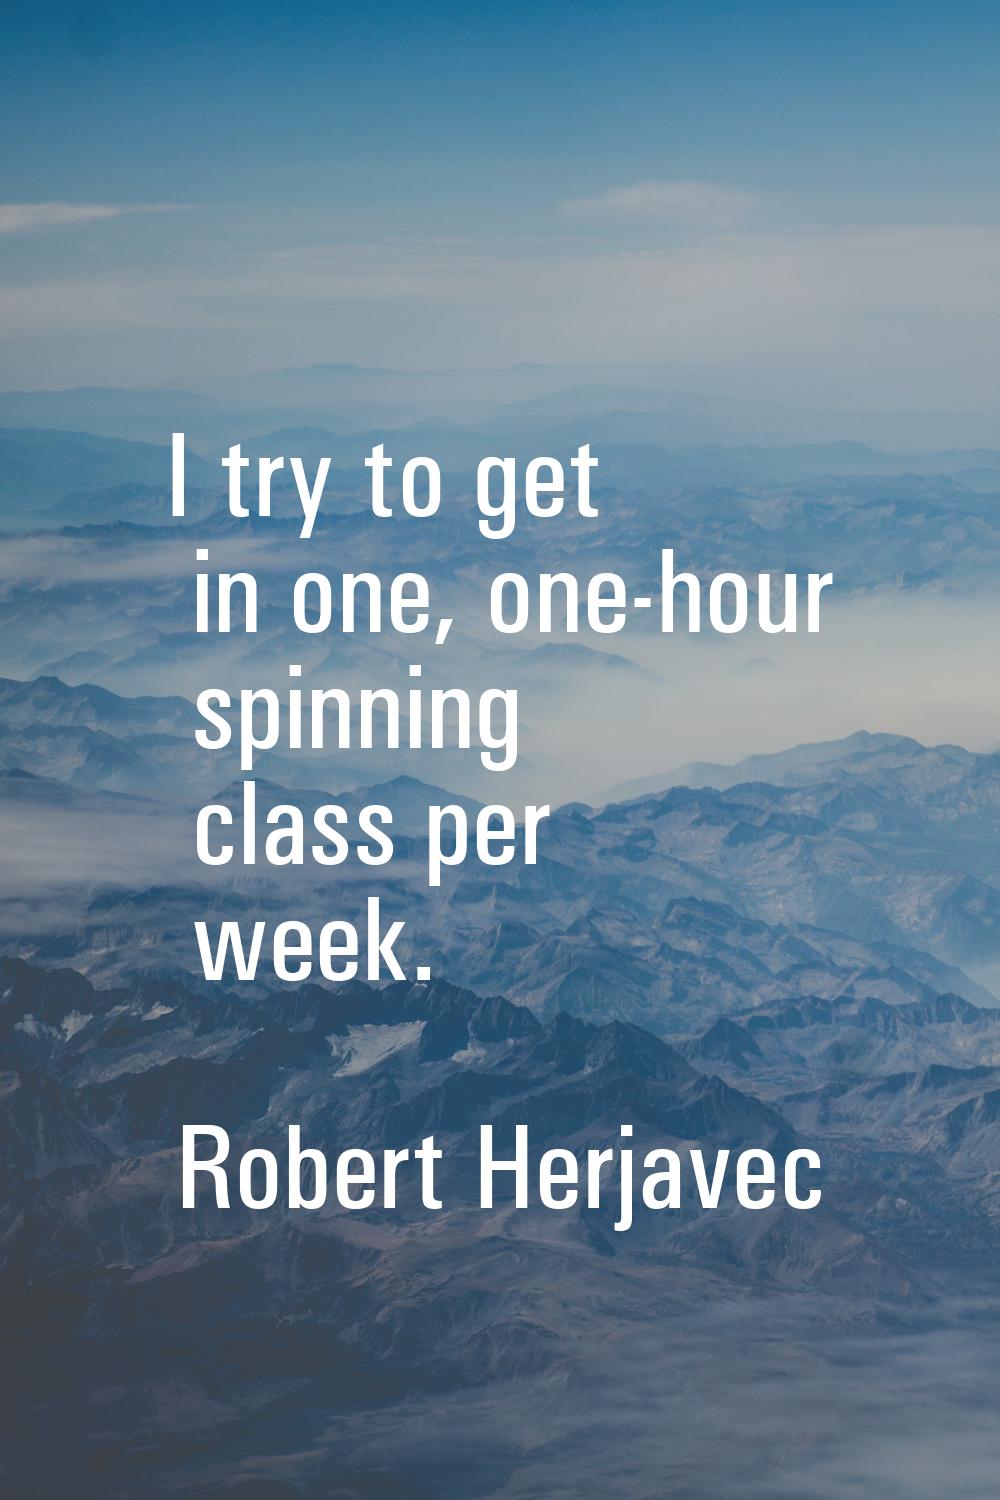 I try to get in one, one-hour spinning class per week.